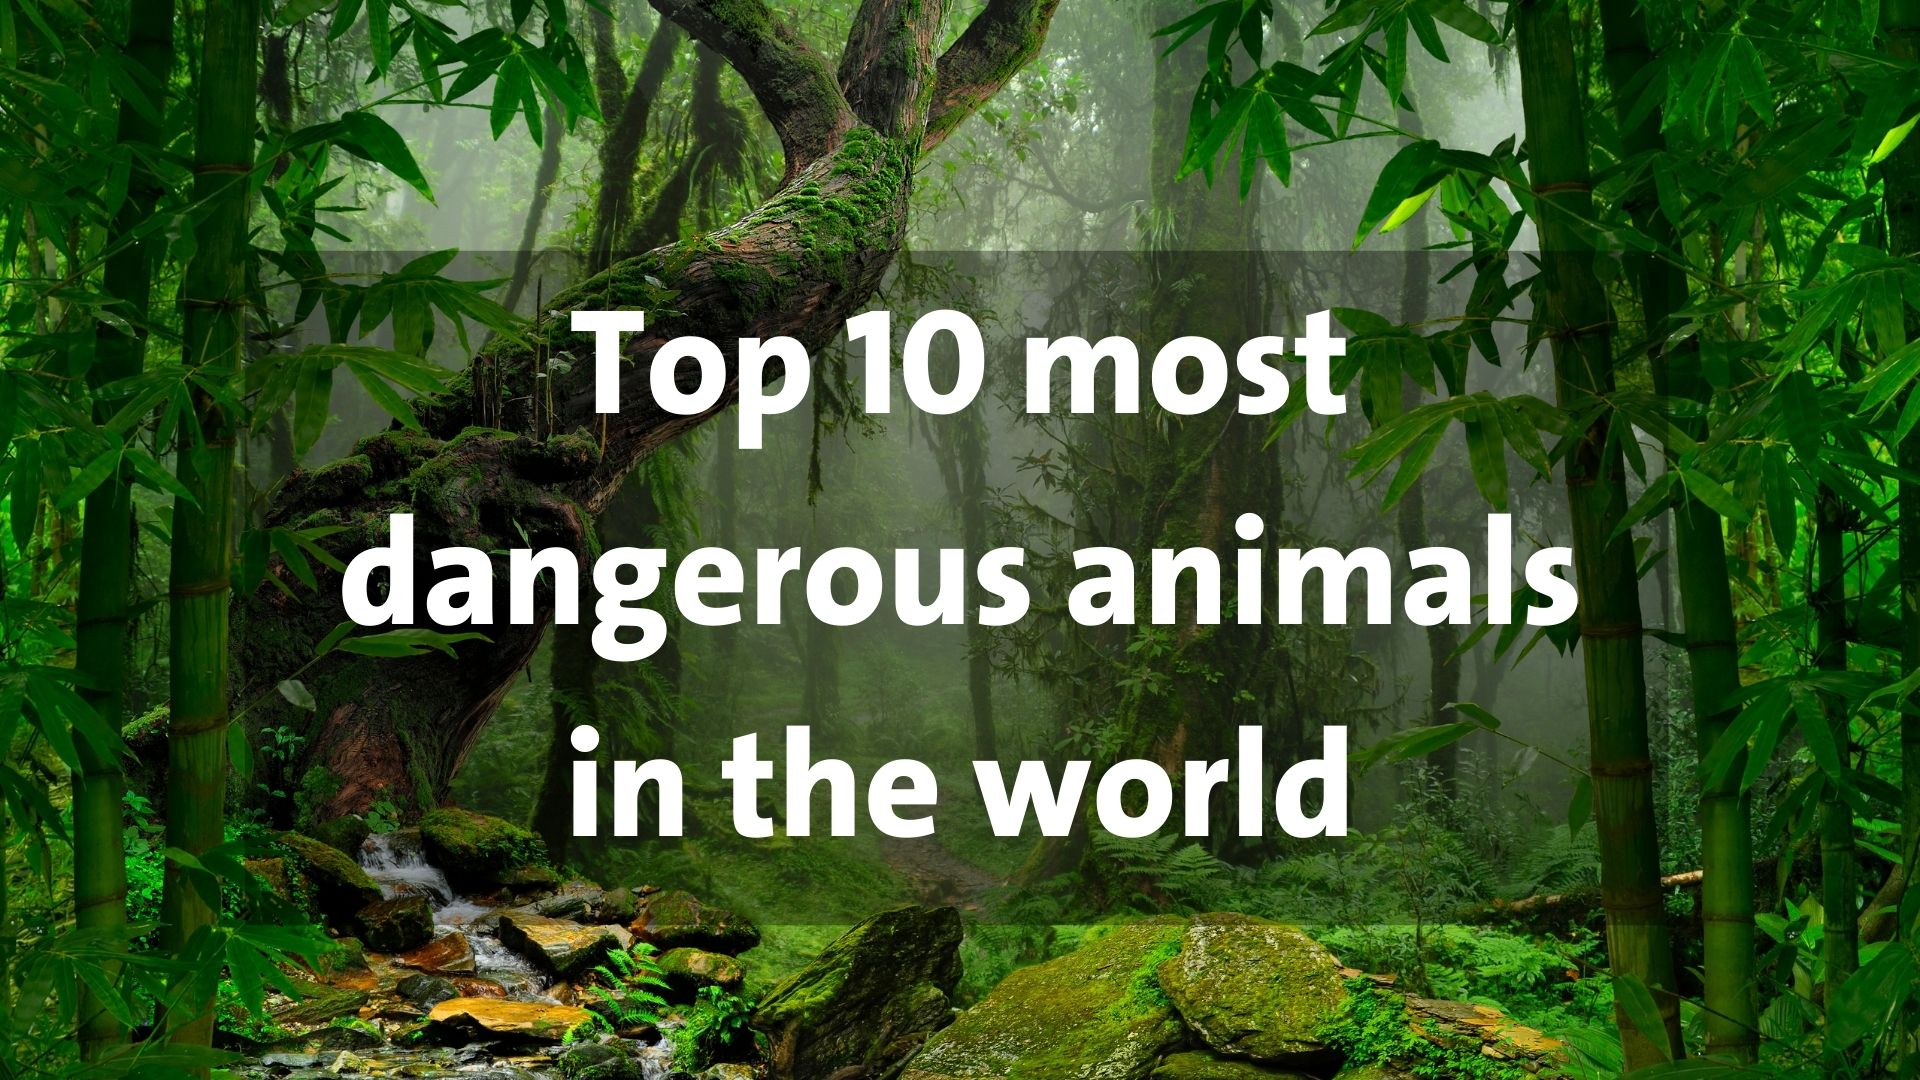 Top 10 most dangerous animals in the world